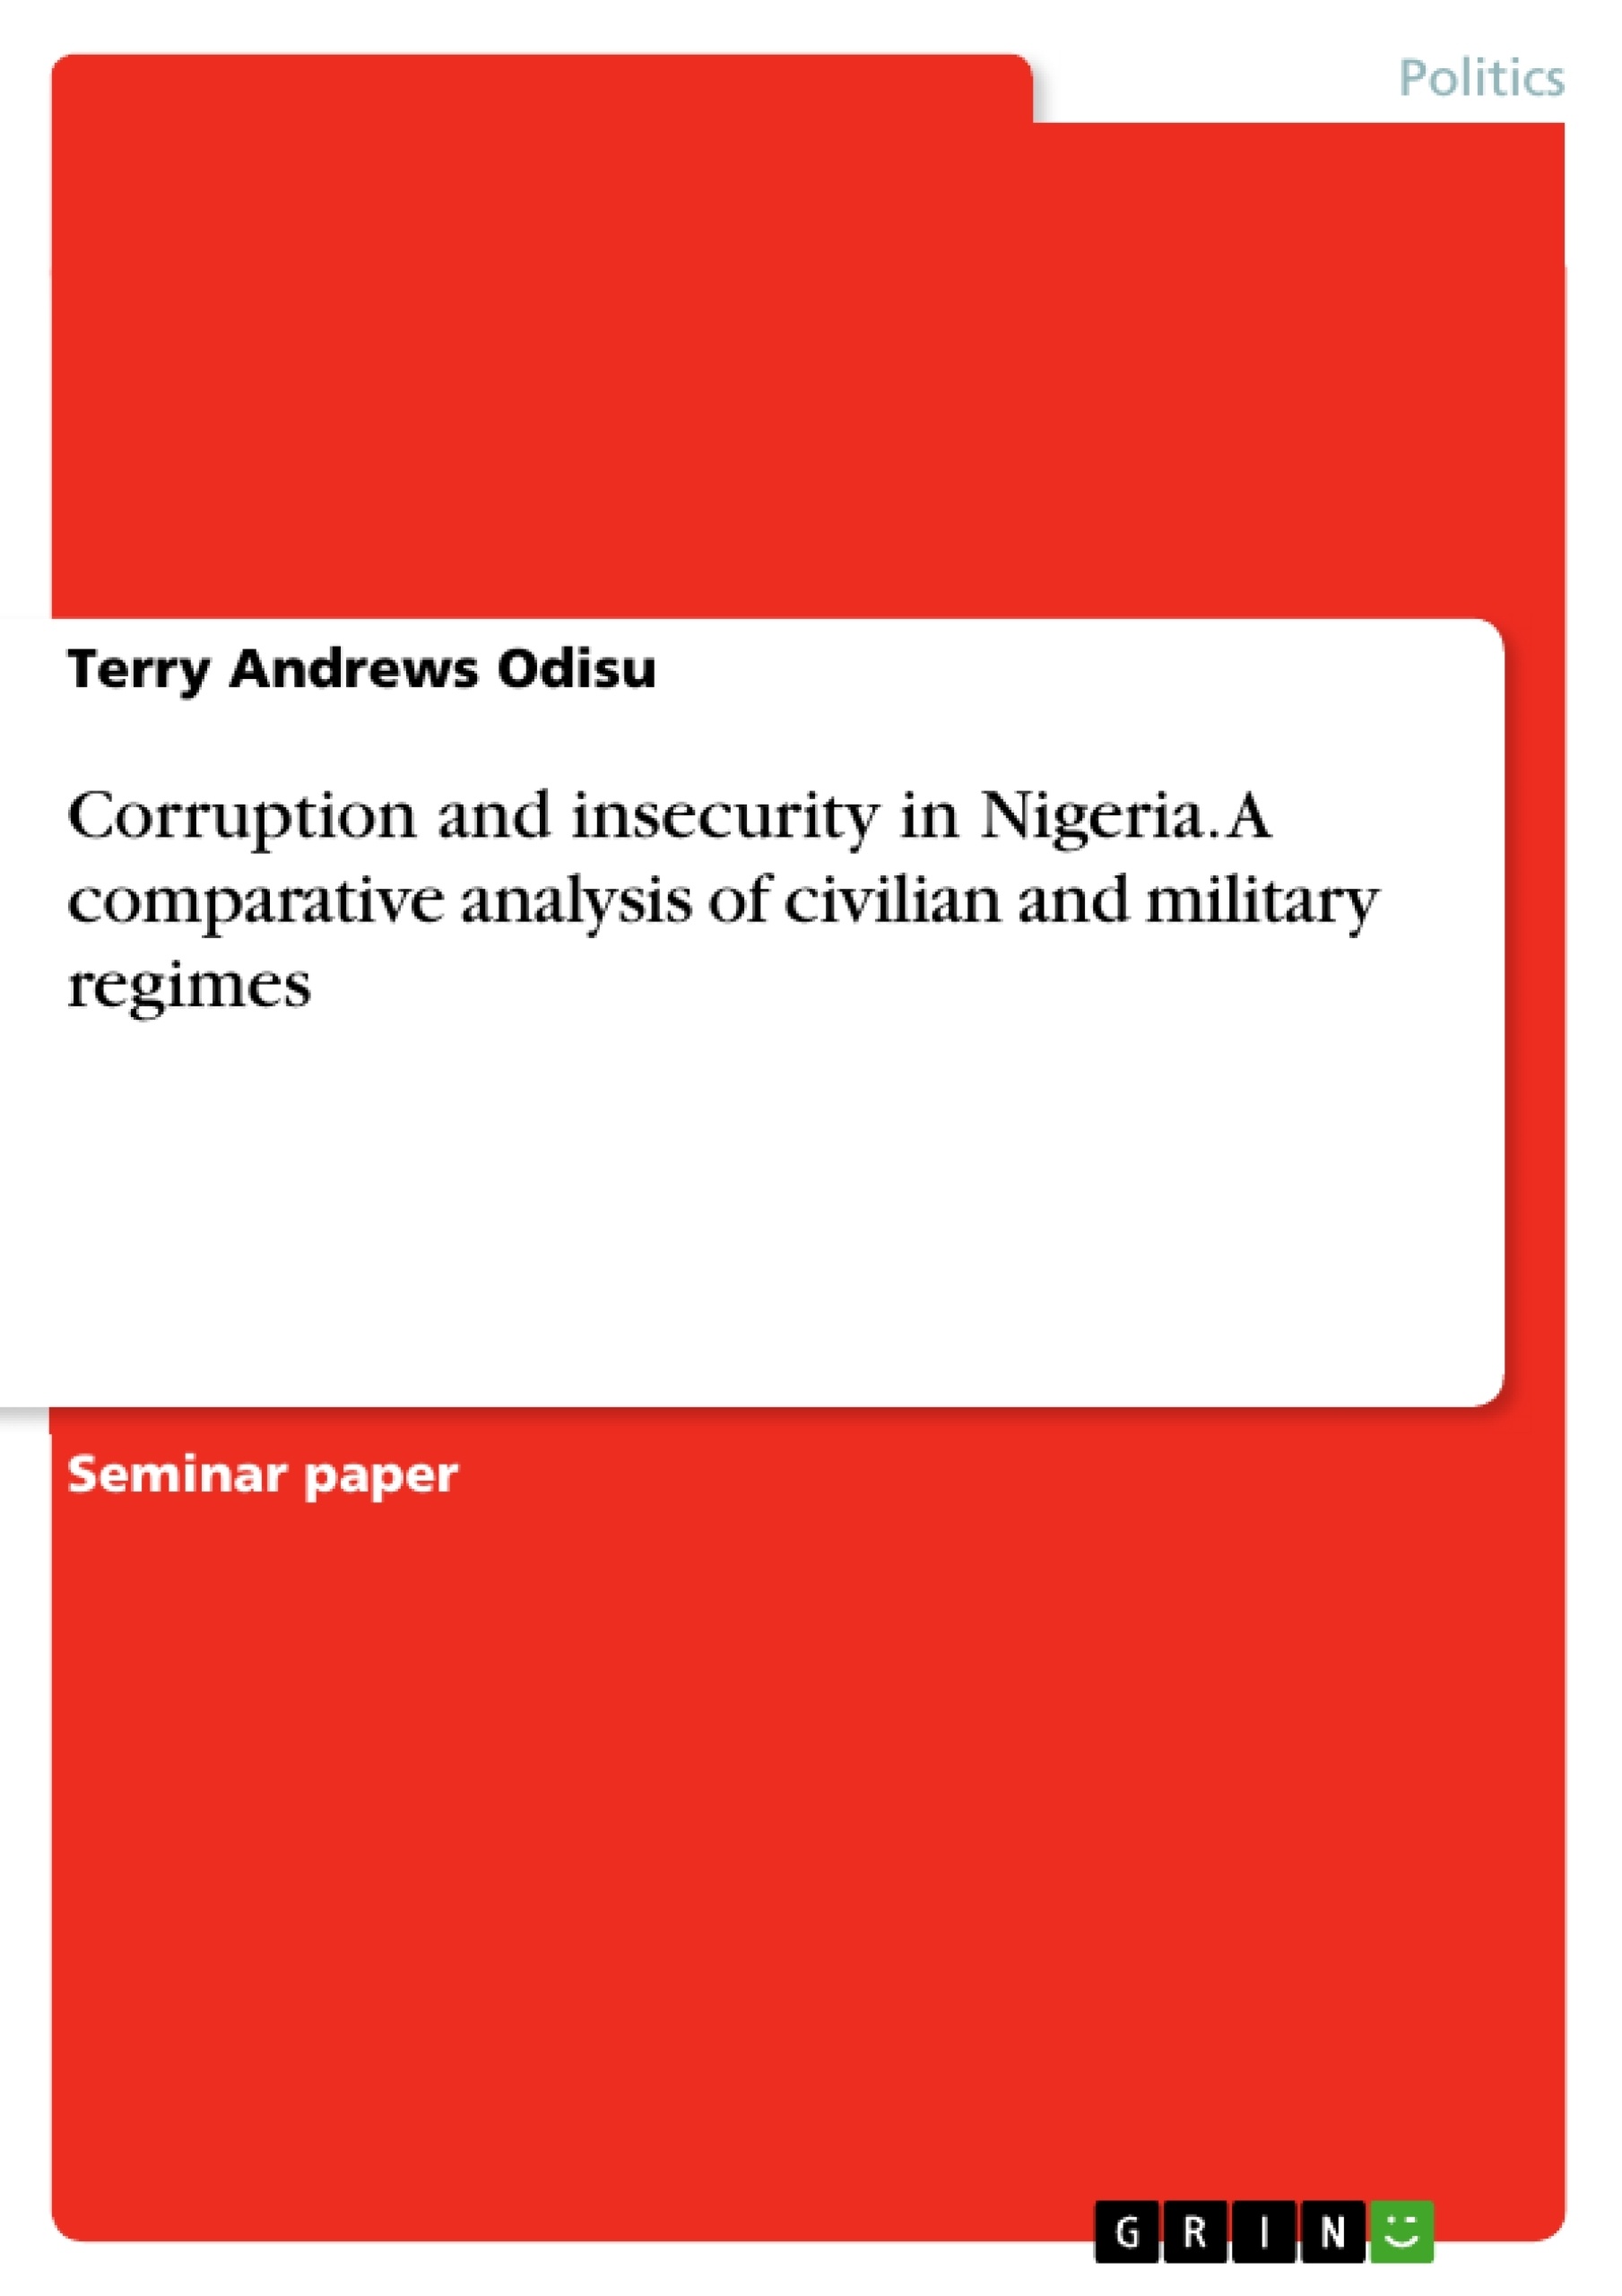 Title: Corruption and insecurity in Nigeria. A comparative analysis of civilian and military regimes